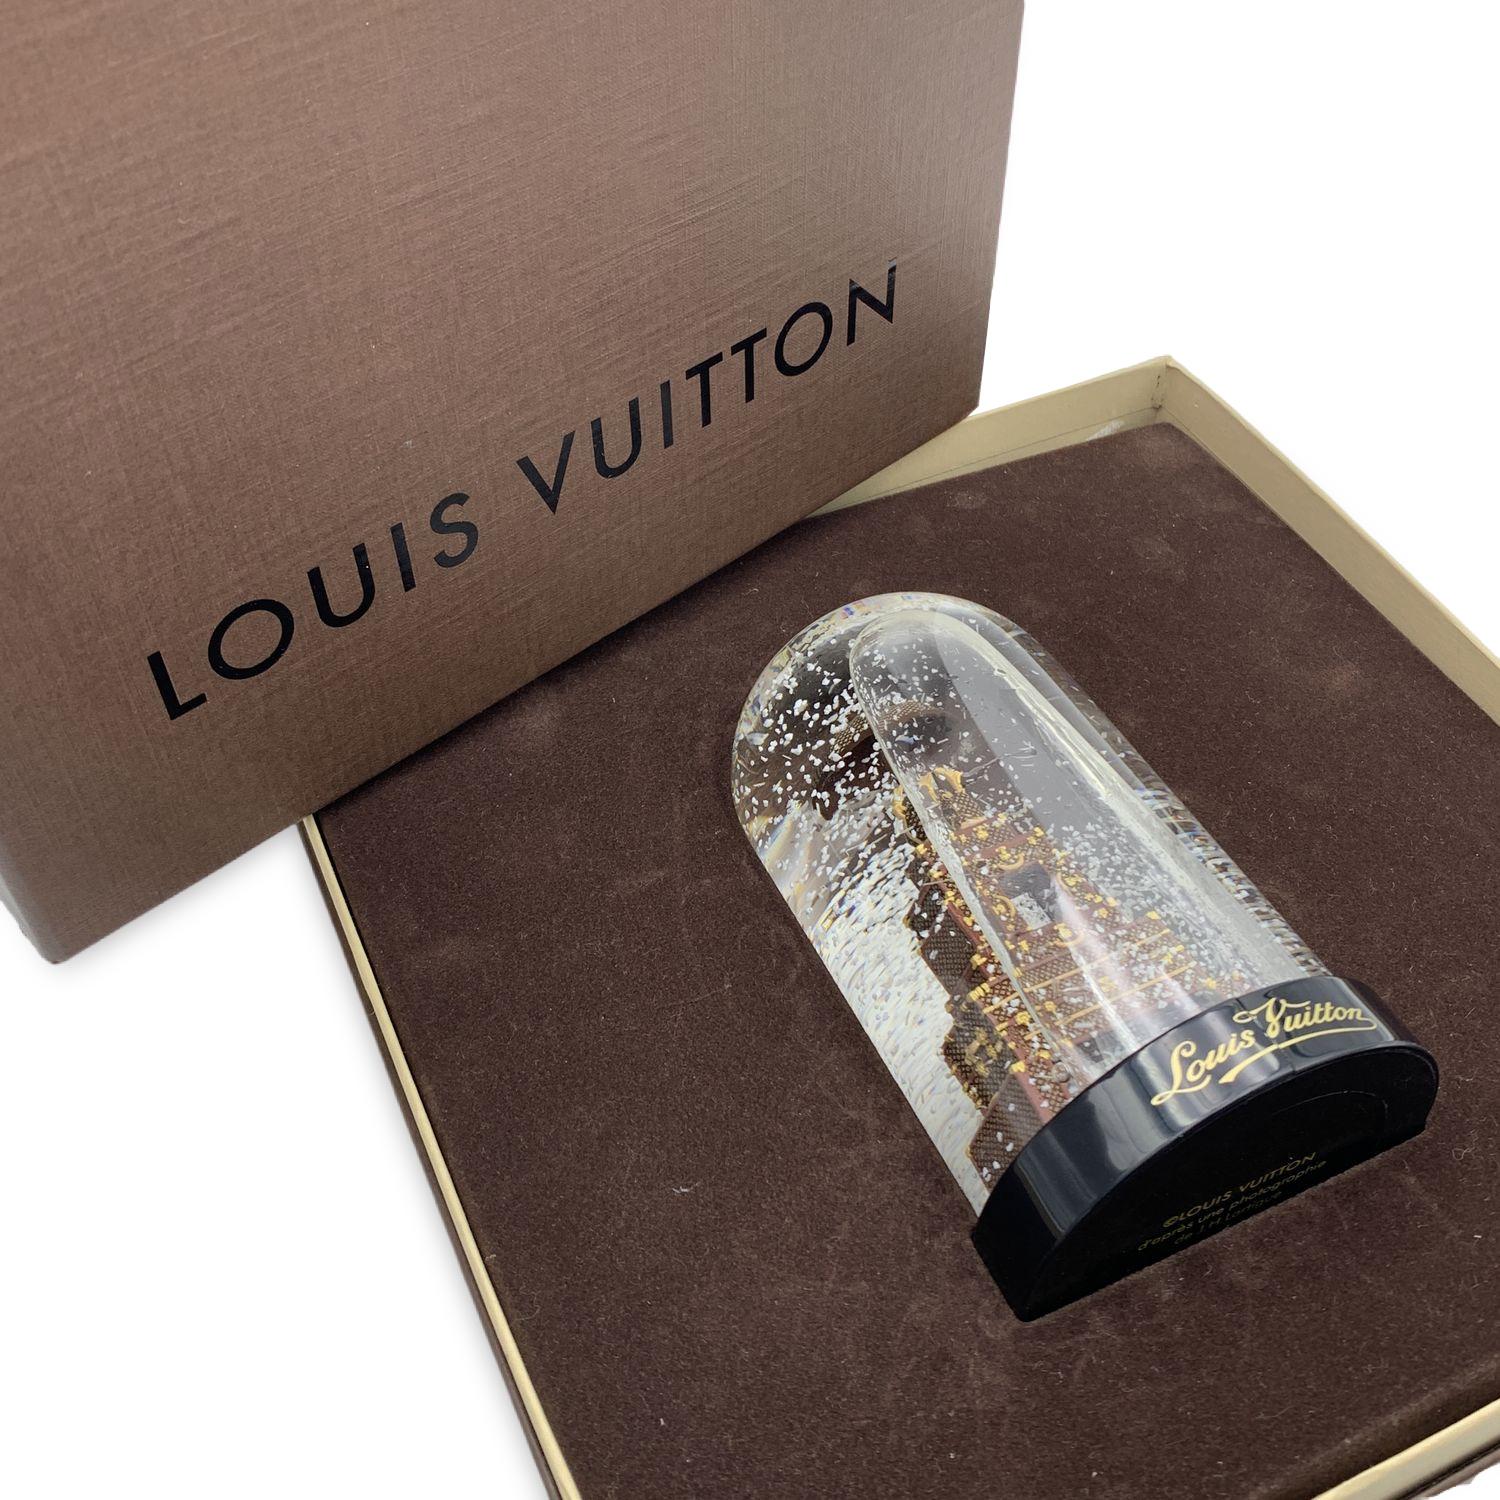 Louis Vuitton snow globe with a miniature reproduction of the iconic Louis Vuitton suitcase and trunks. . It is made of clear glass with a black plastic base. 'Louis Vuitton' signature on the base. Made to celebrate the 1st anniversary of the